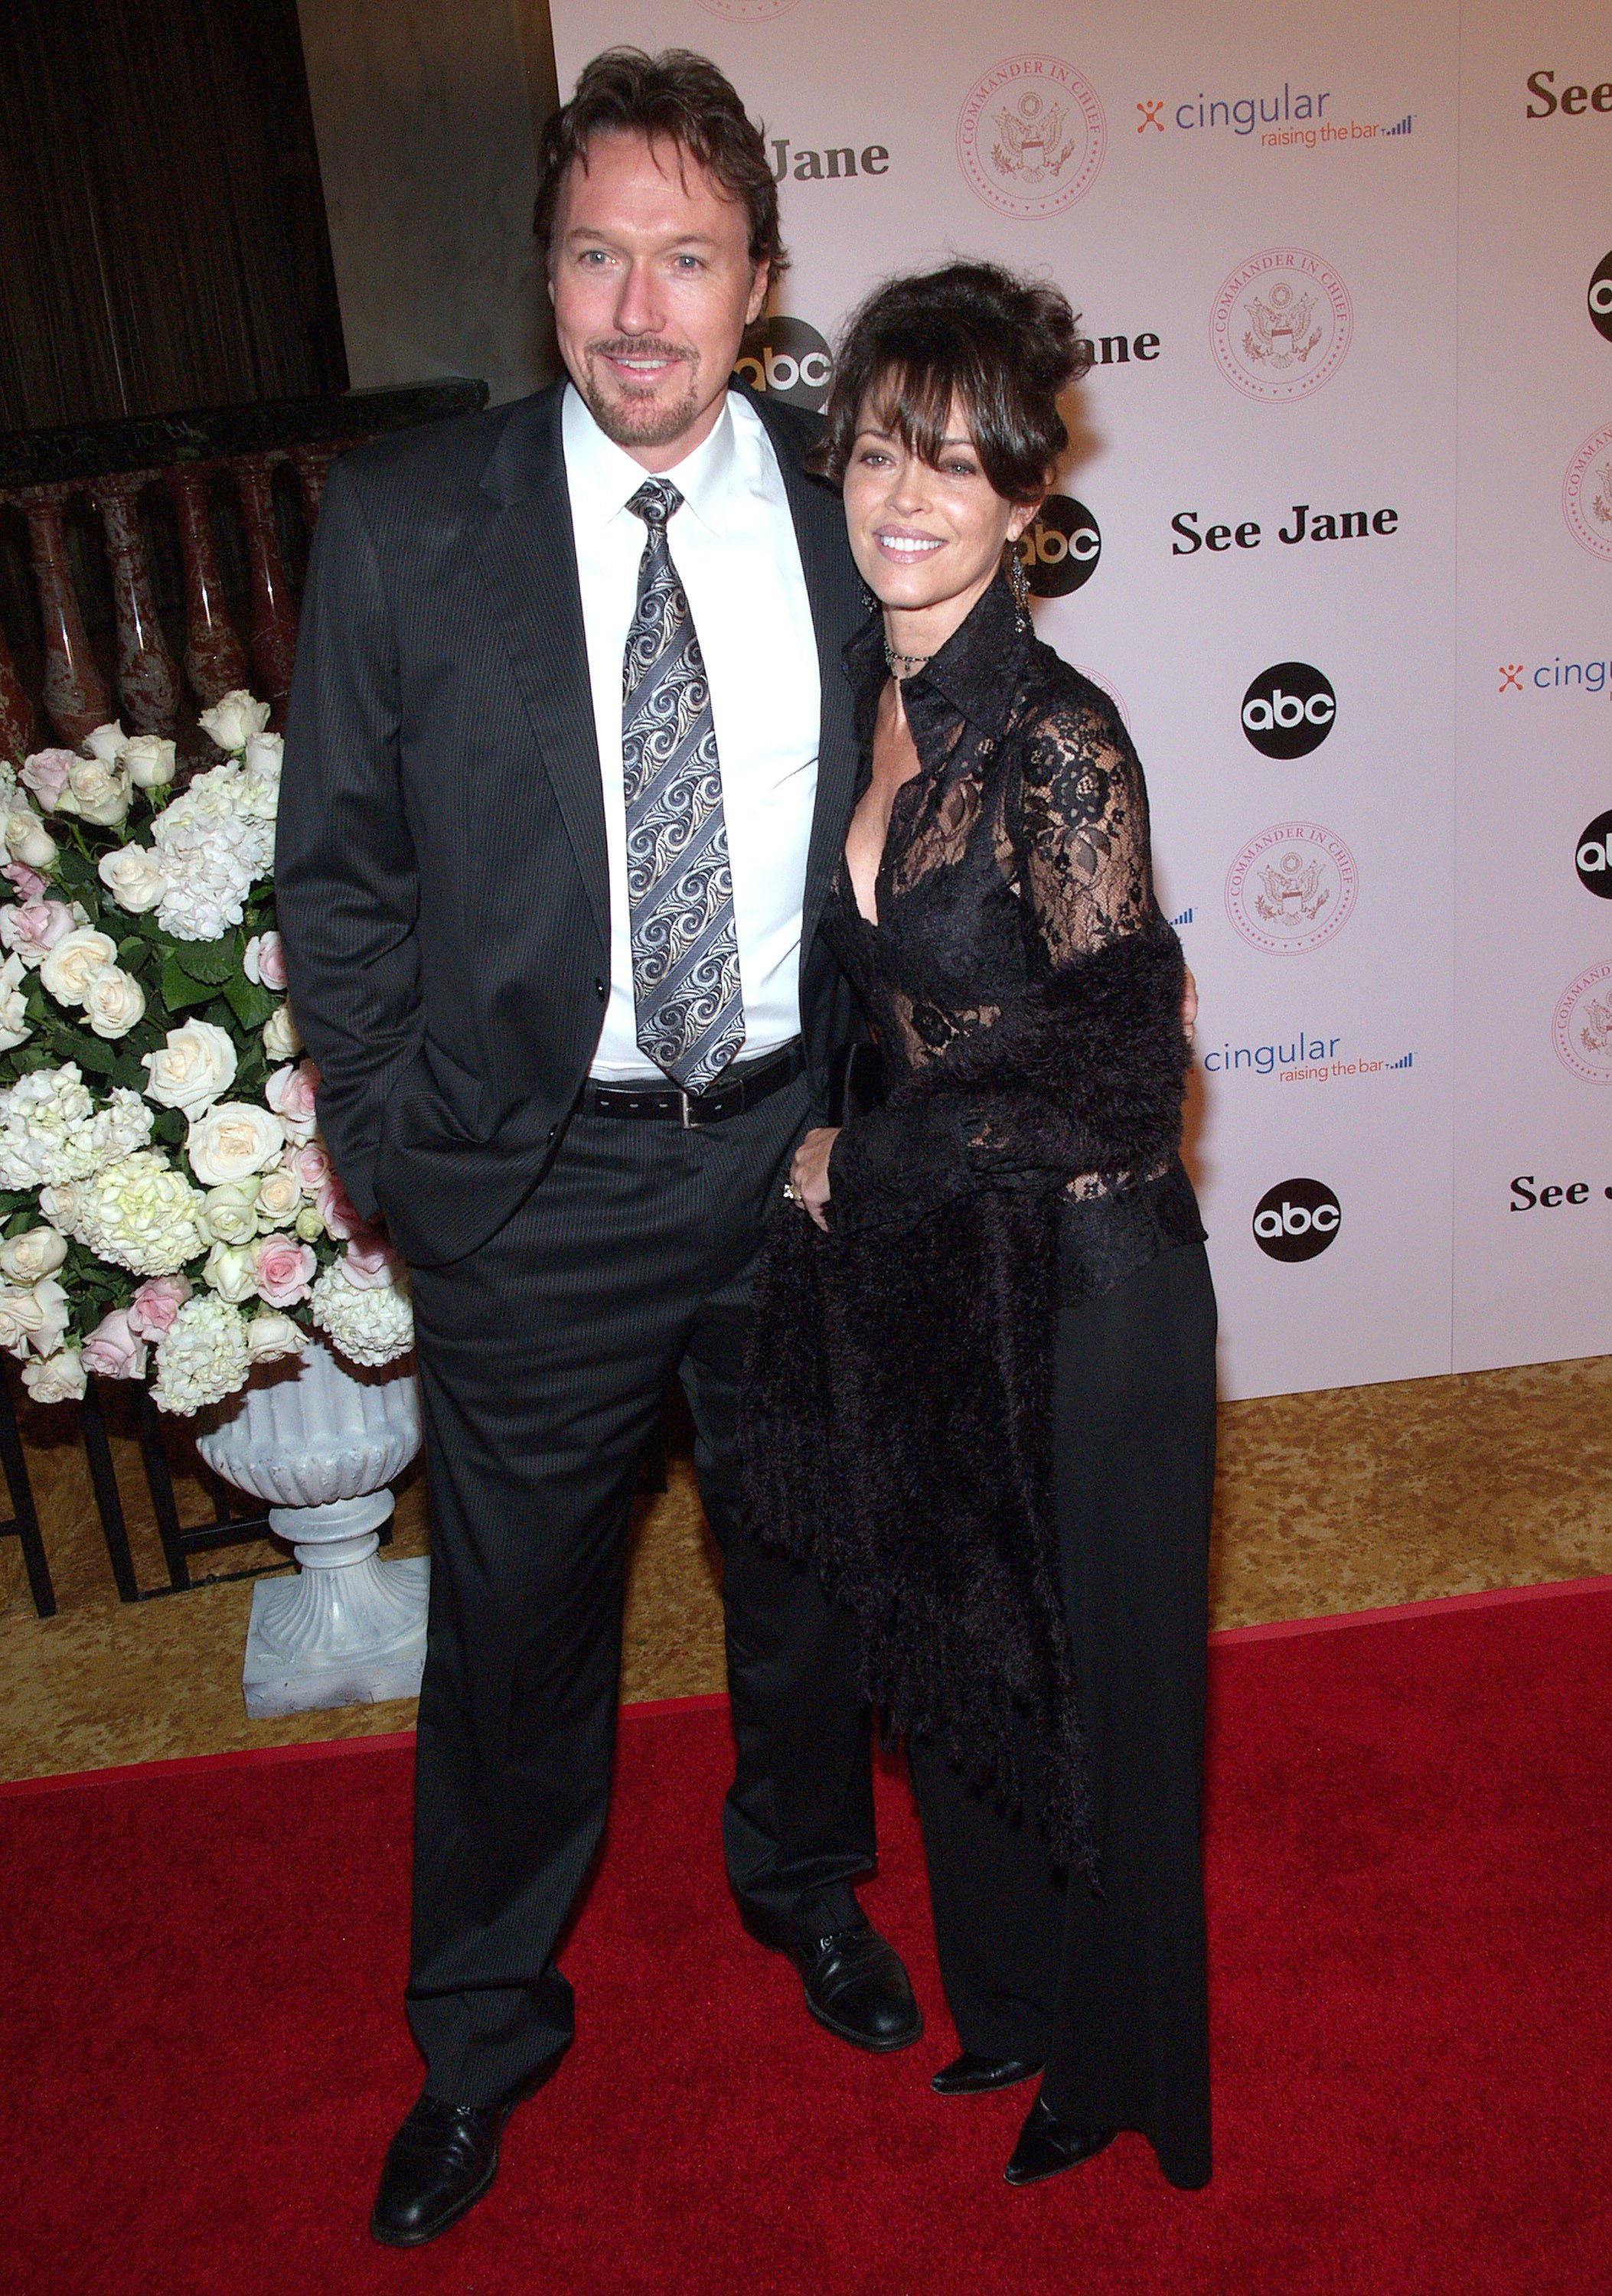 Thomas Griffith and Mary Page Keller during "Commander-in-Chief" Inaugural Ball and Premiere Screening on September 21, 2005 | Photo: Getty Images